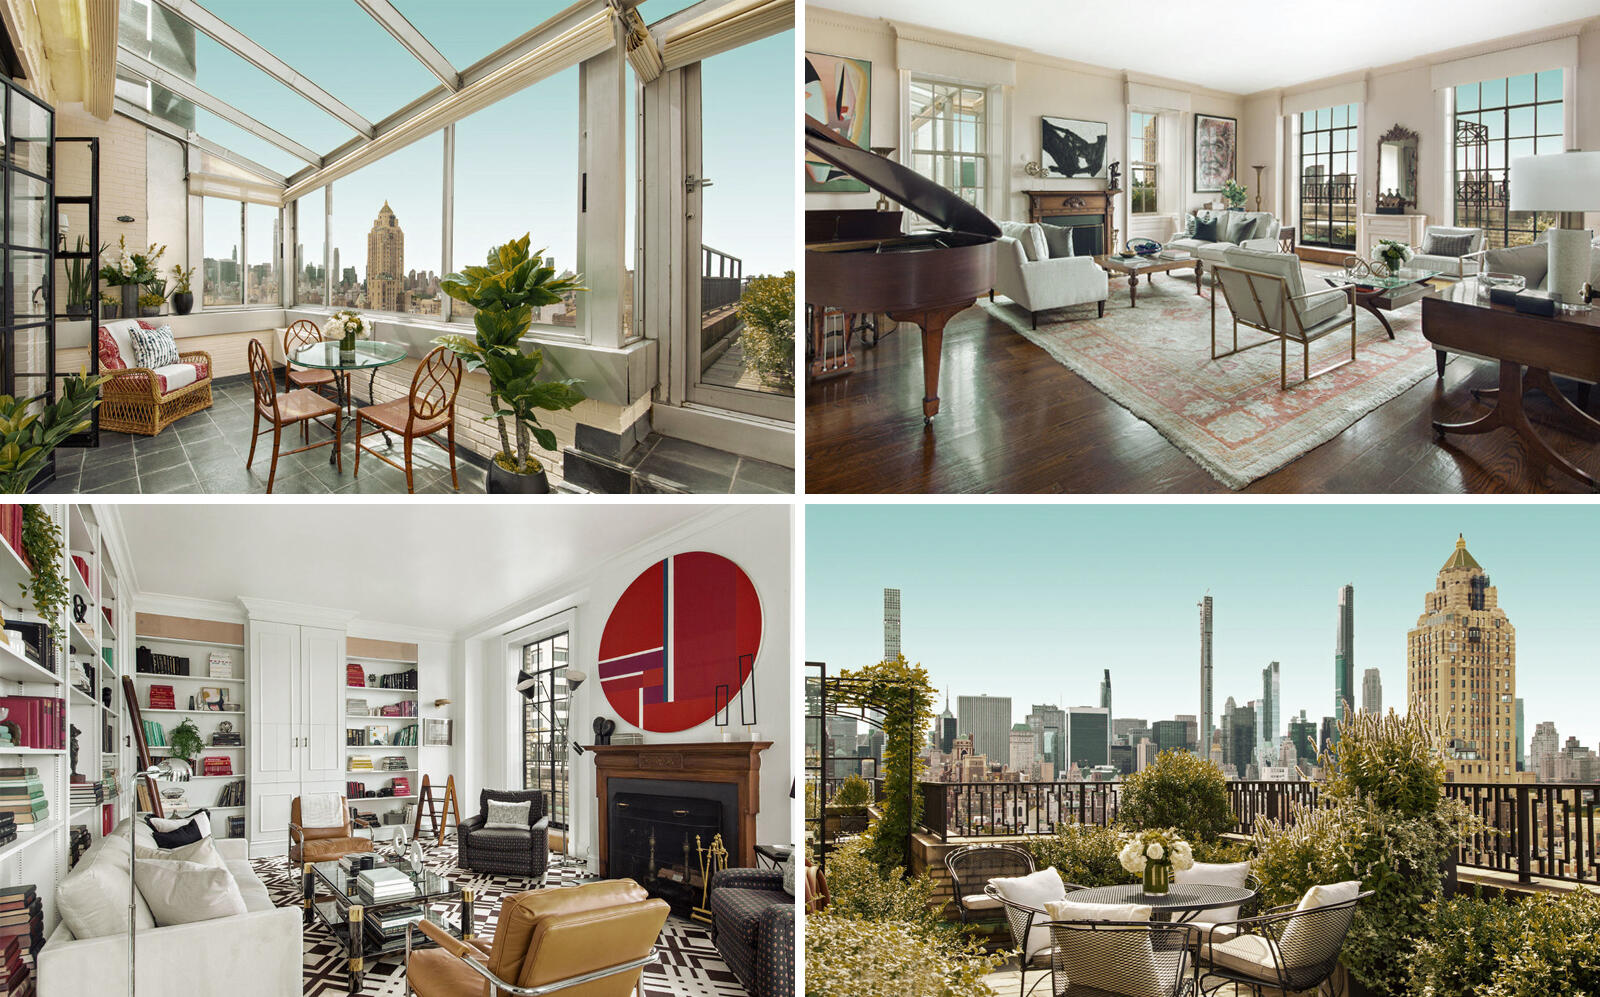 The PHA unit of 895 Park Avenue was the top contract of the past week (Warburg Realty)